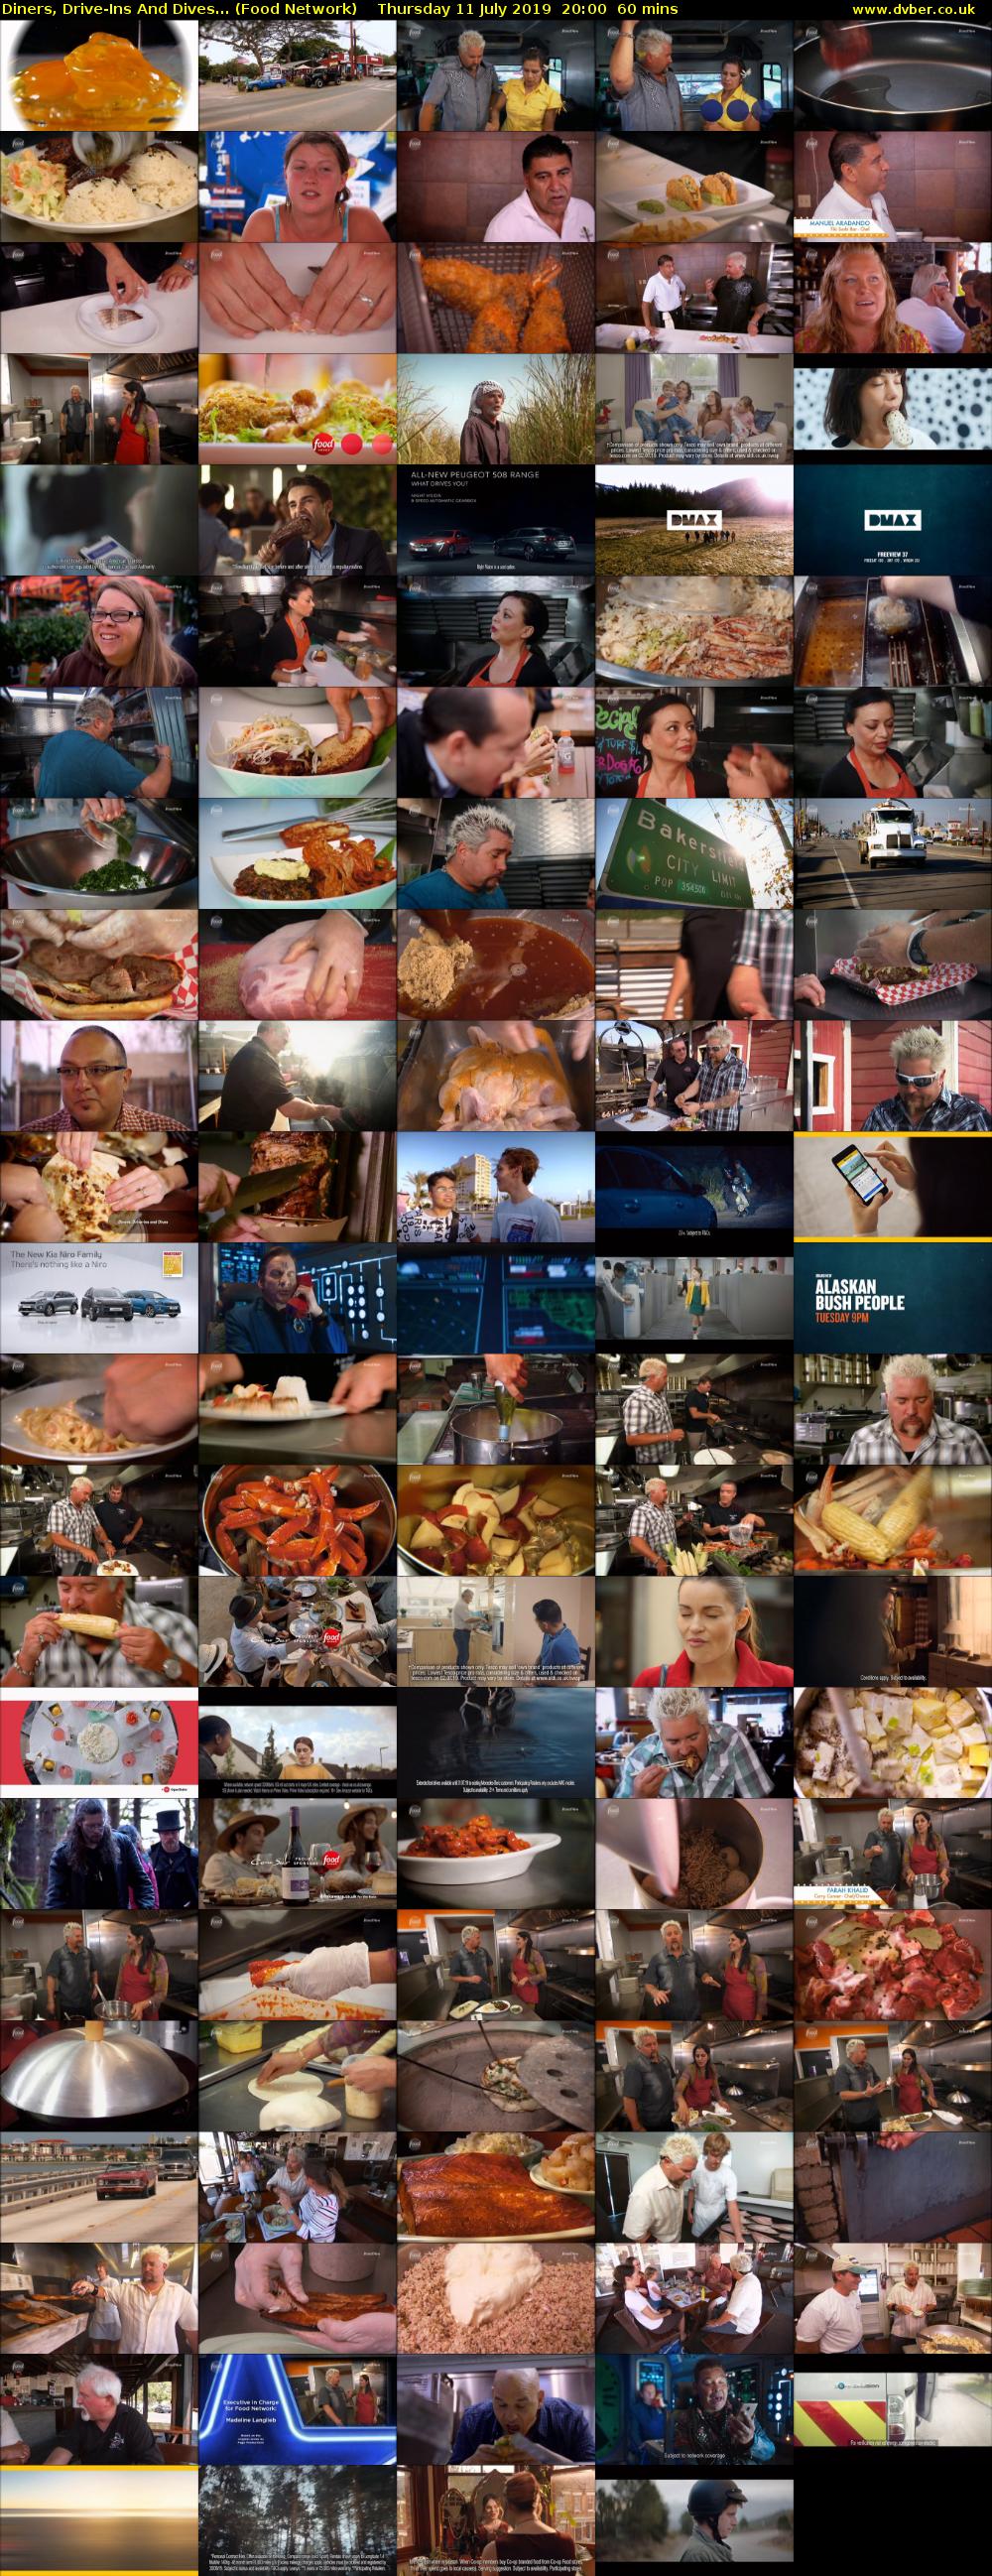 Diners, Drive-Ins And Dives... (Food Network) Thursday 11 July 2019 20:00 - 21:00